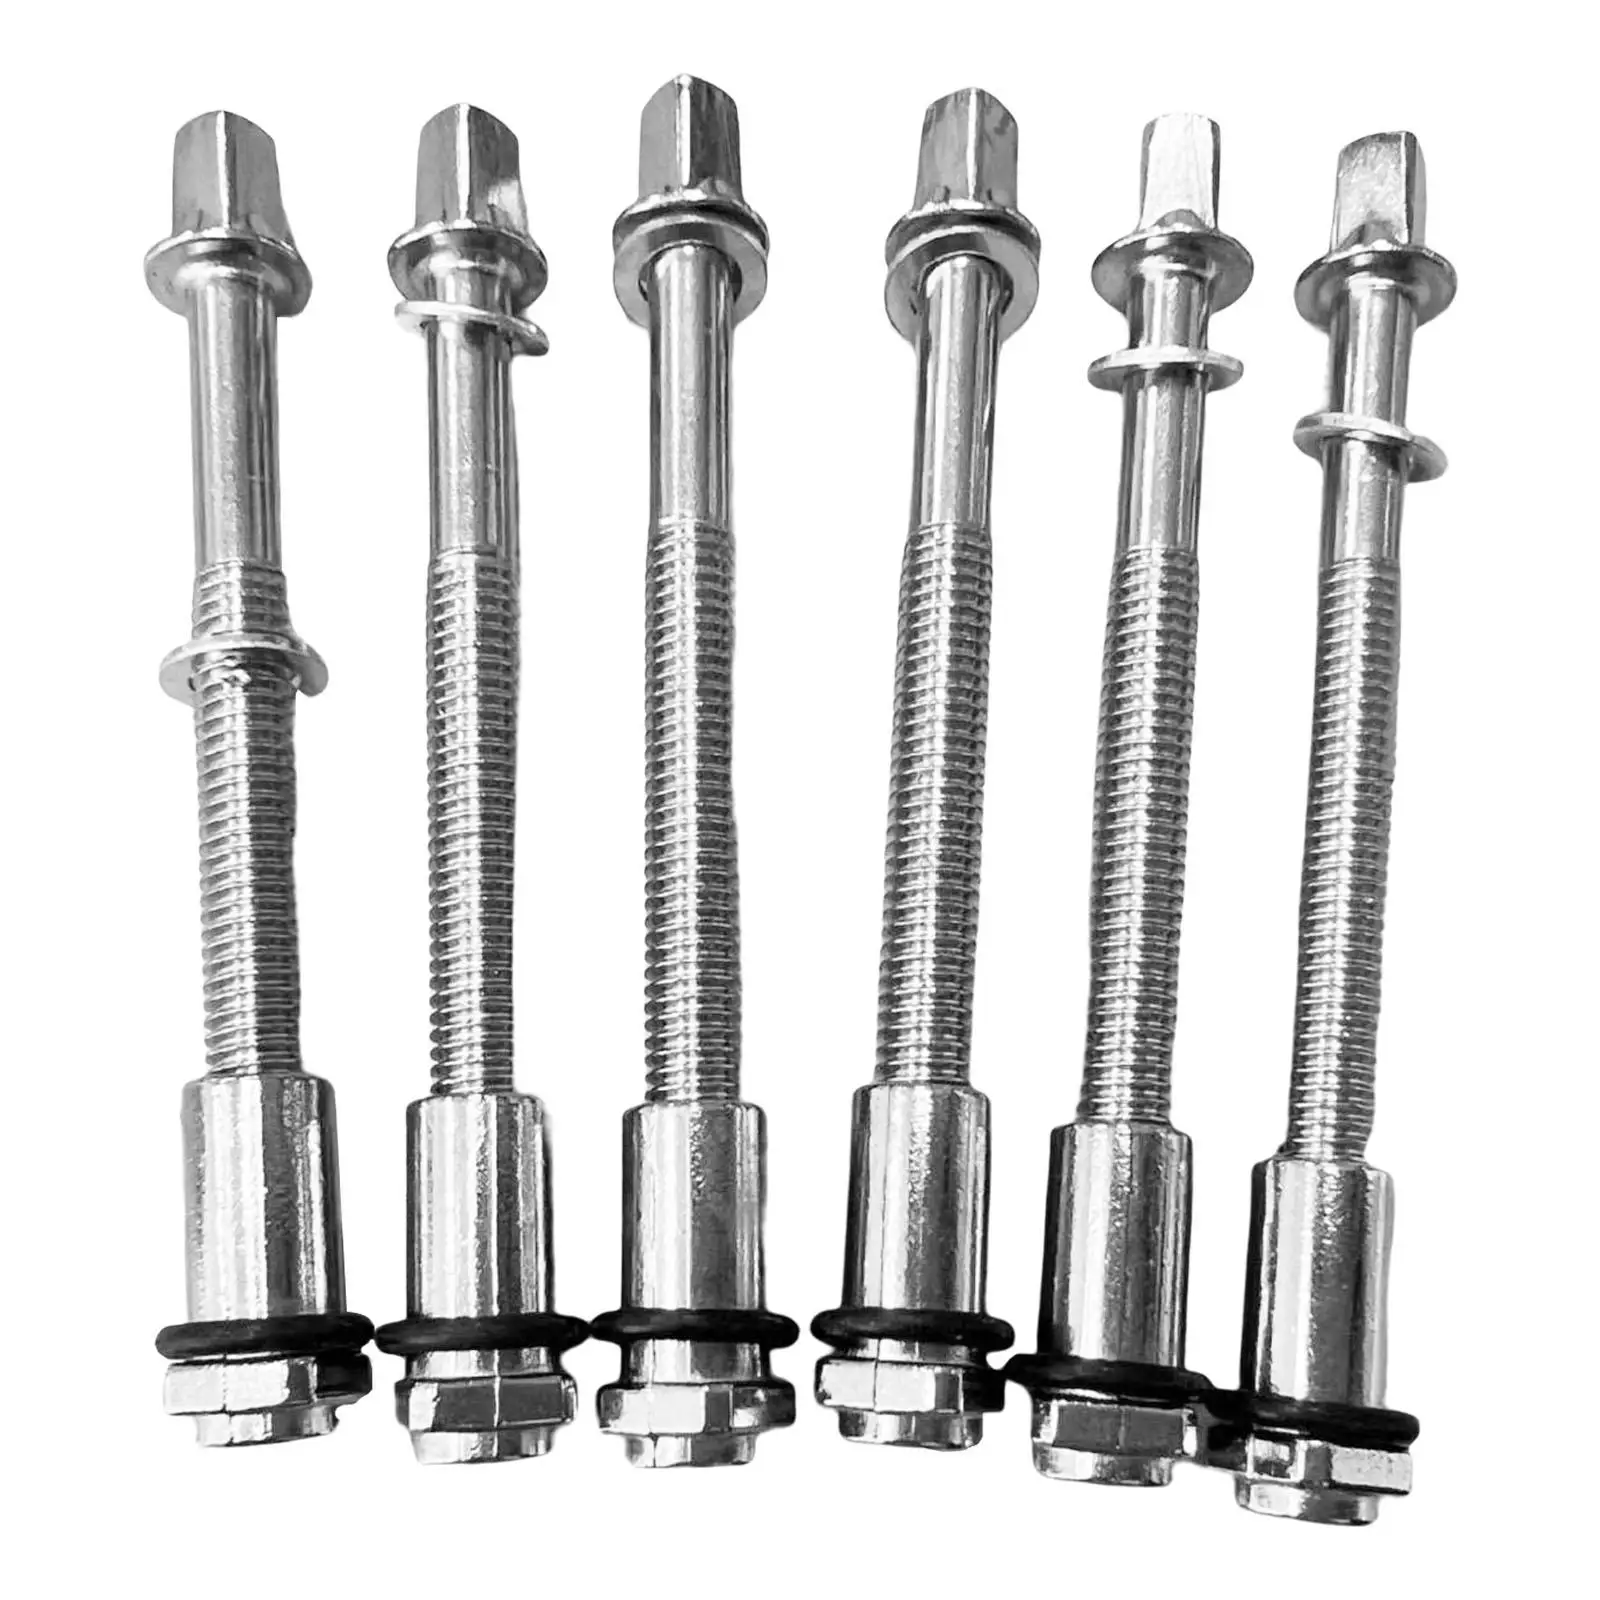 6 Pieces Drum Tension Rods with Washer for Snare Drums Bass Drum Replacement